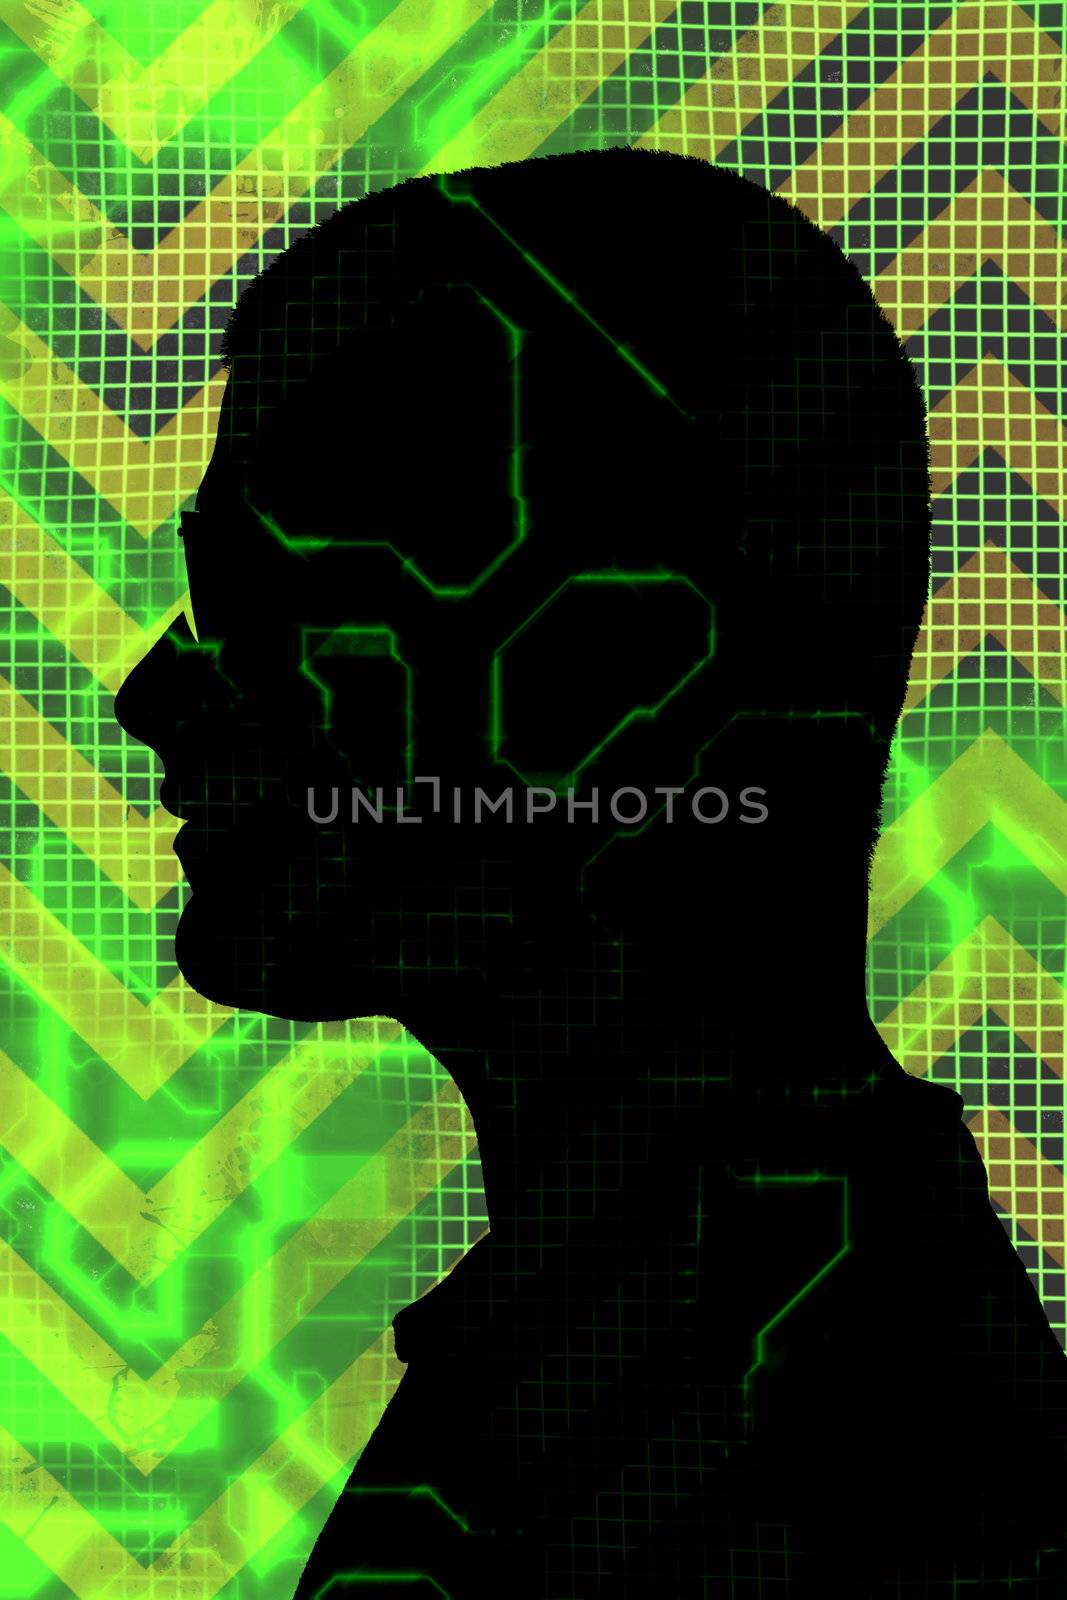 Male profile silhouette overlayed with digital circuitry and green electronic accents.